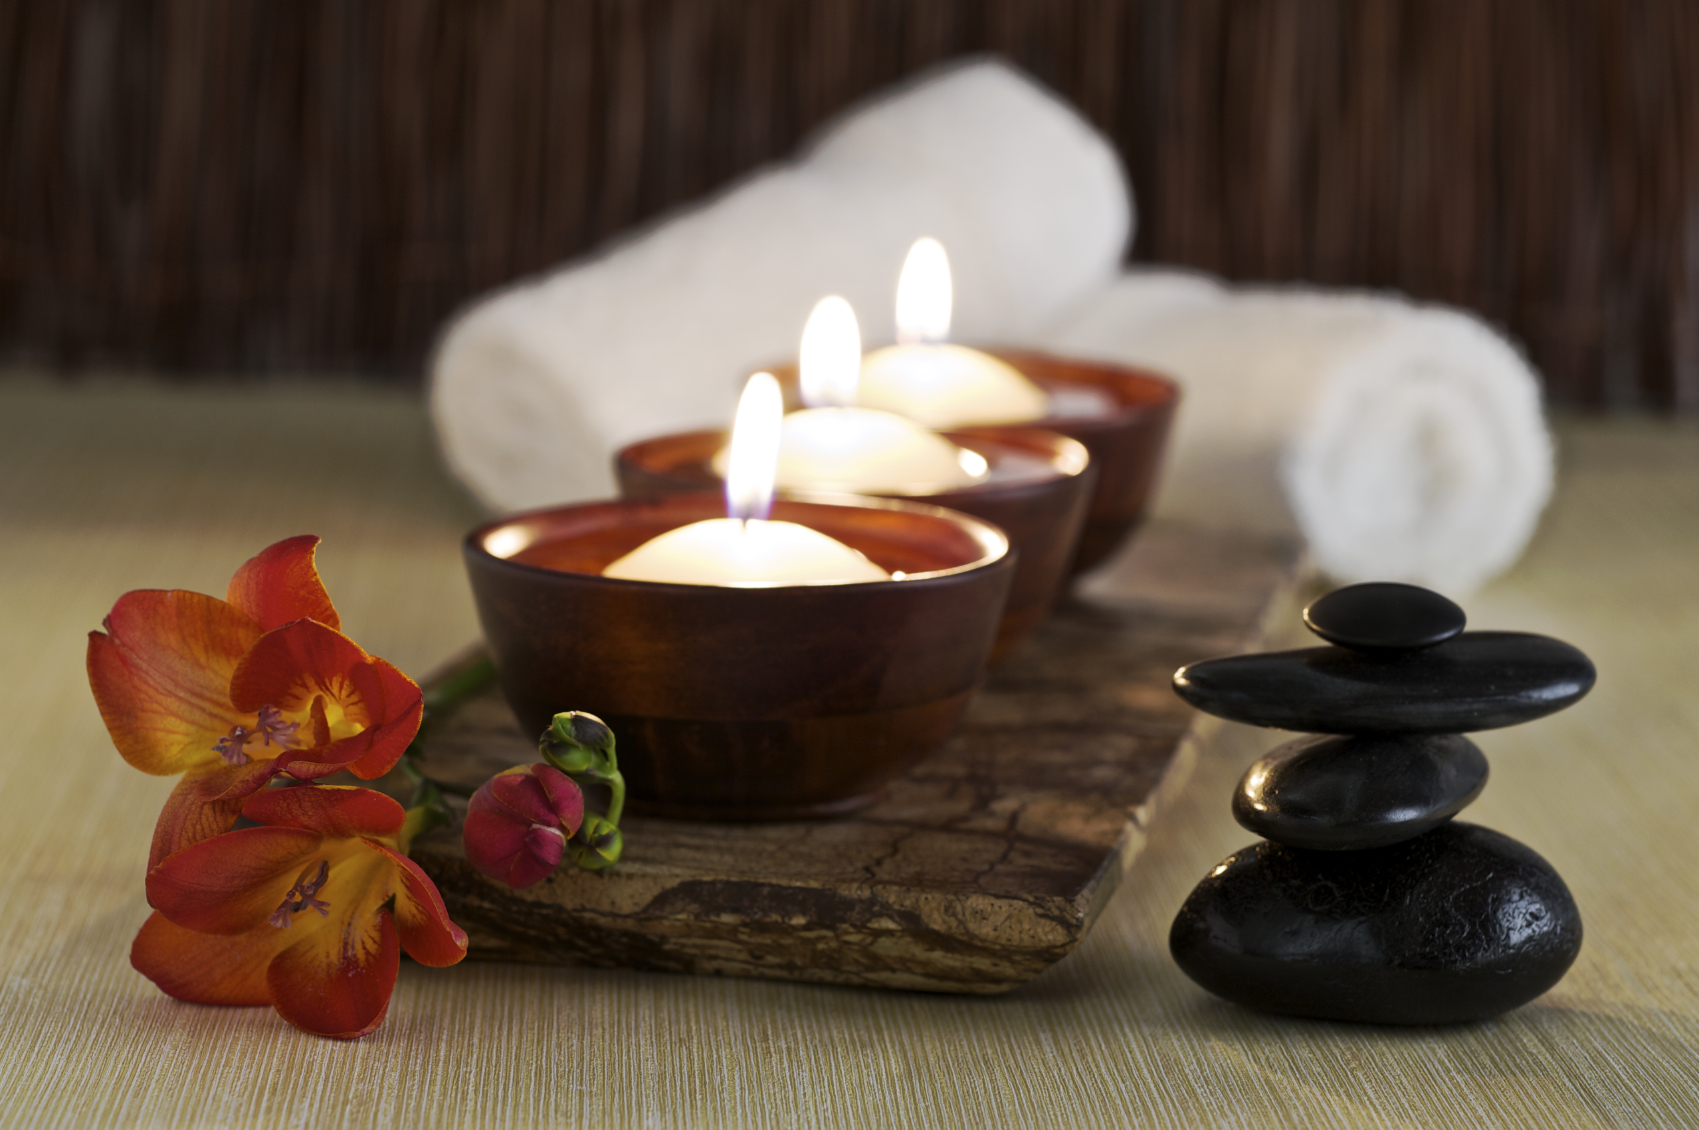 Tranquillity-Relaxation-Treatment